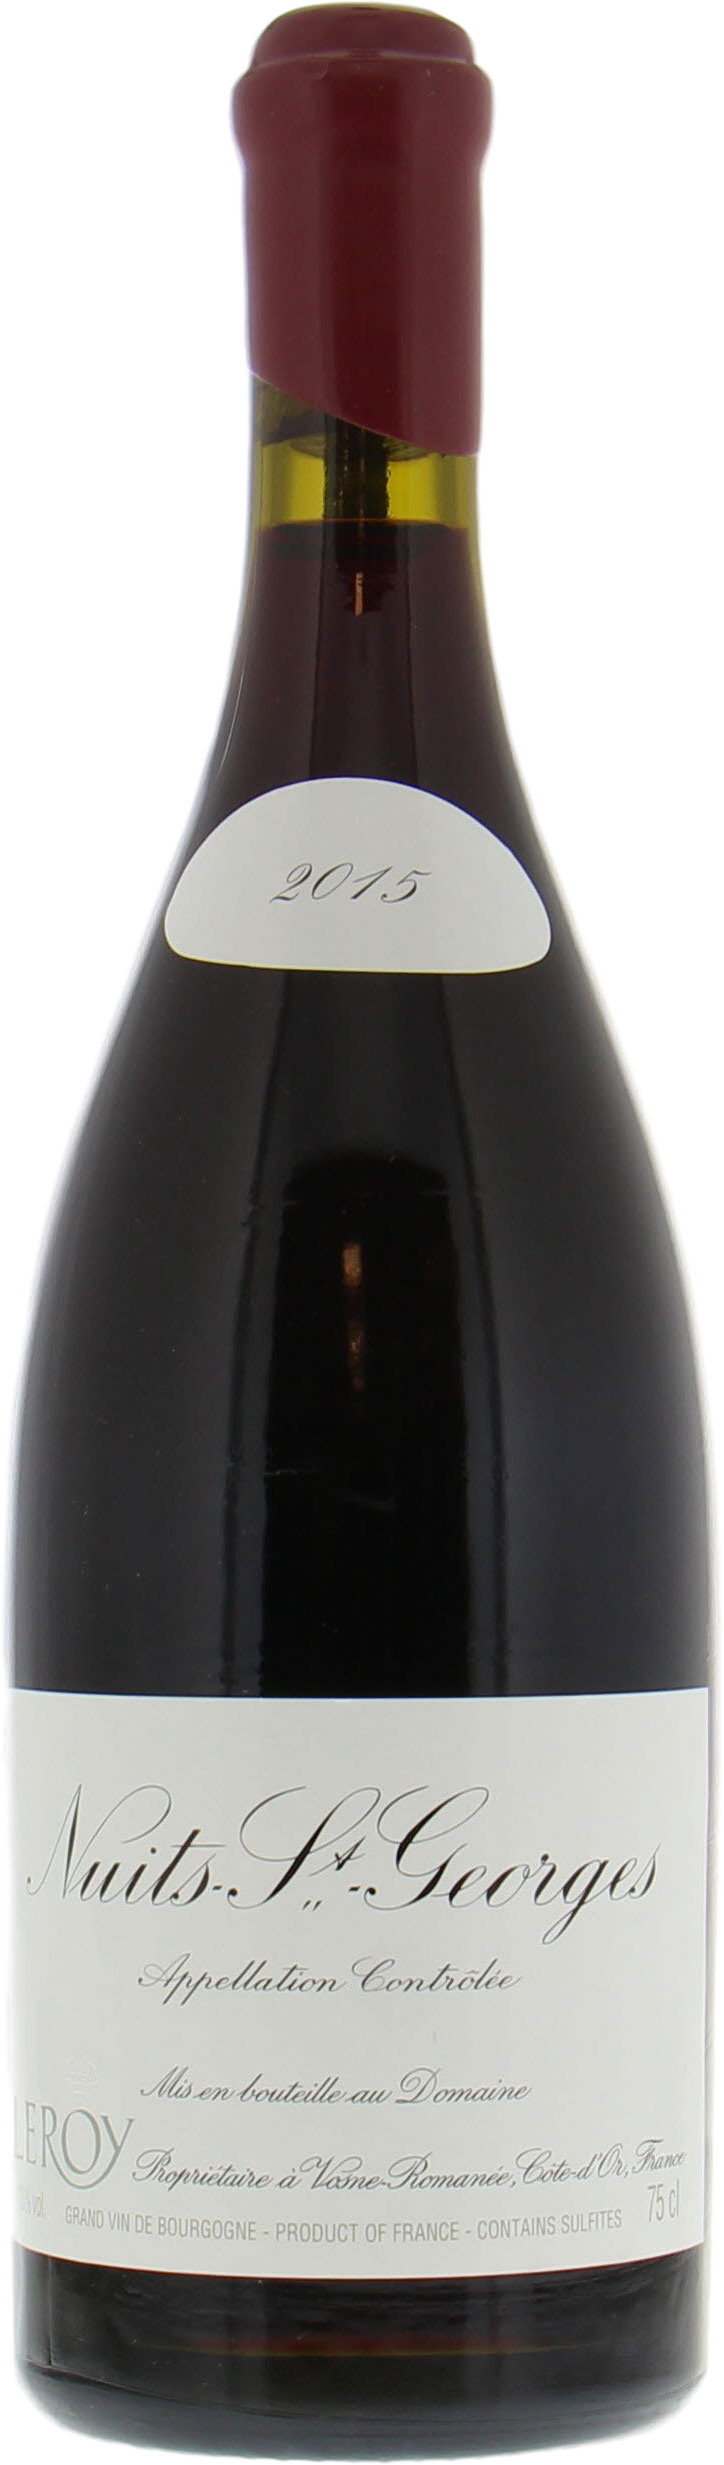 Domaine Leroy - Nuits St. Georges 2015 Perfect